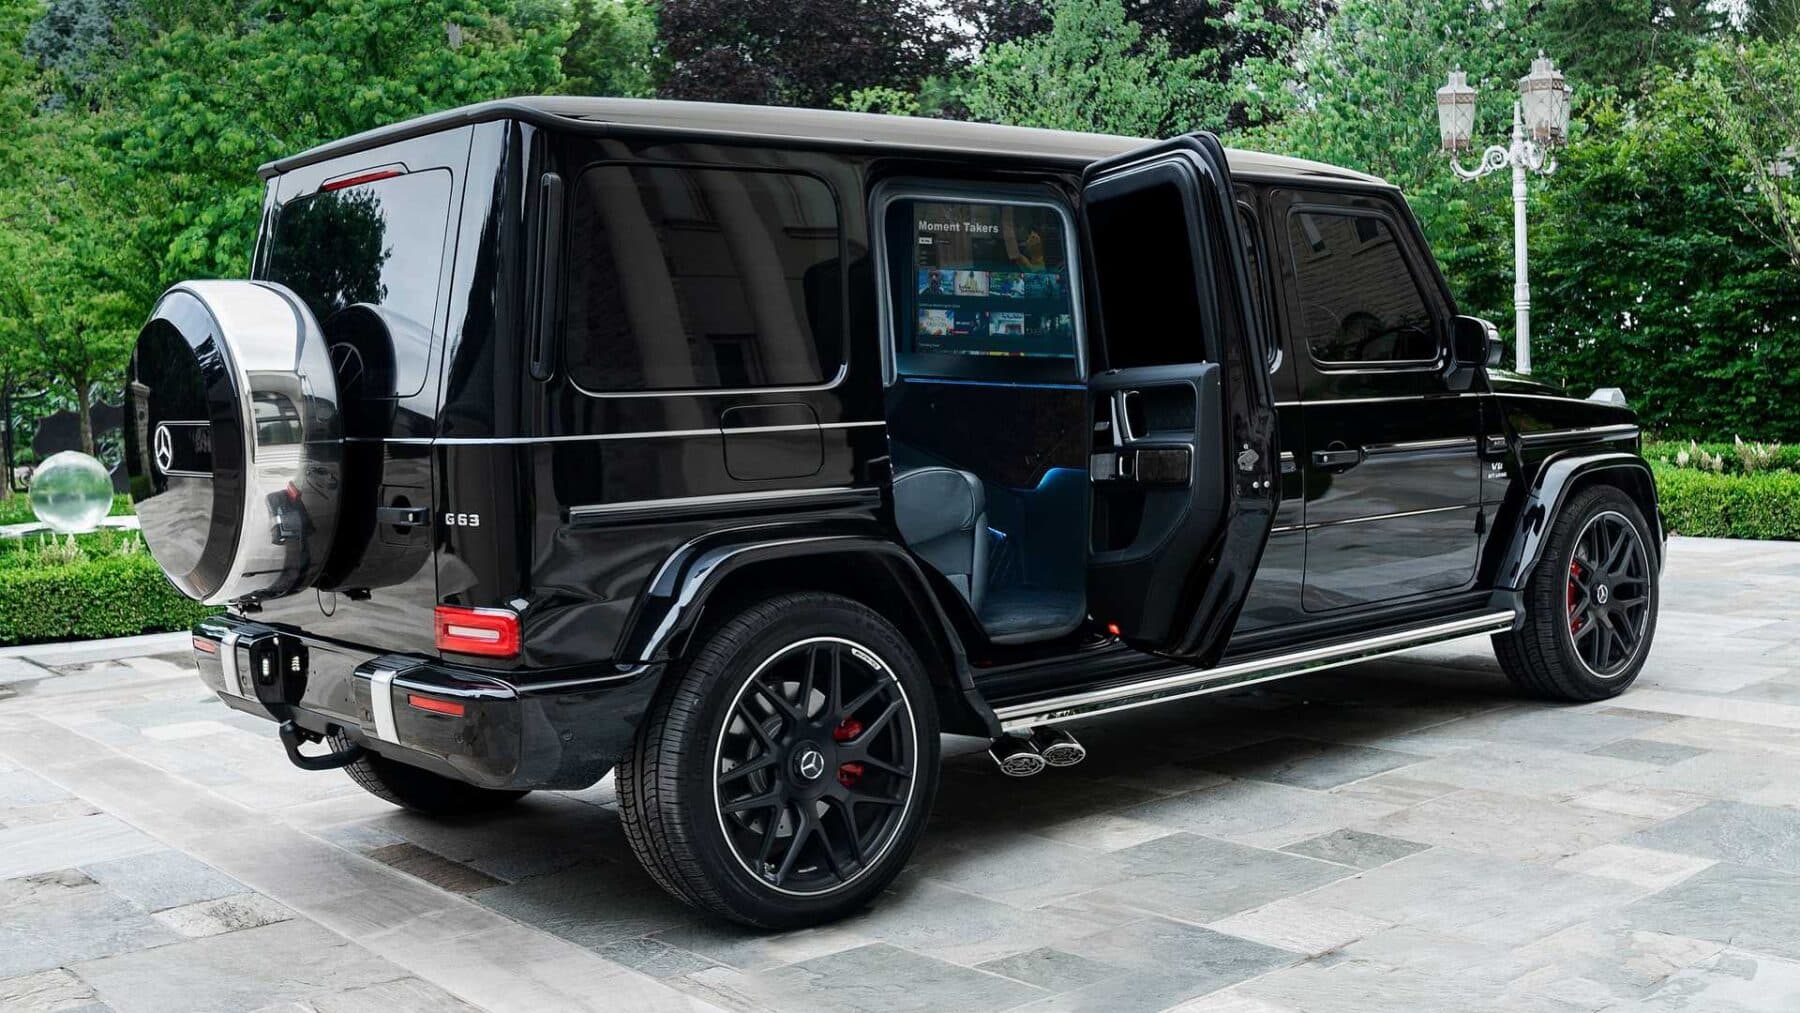 This armored Mercedes-AMG G63 is as safe as a German bunker